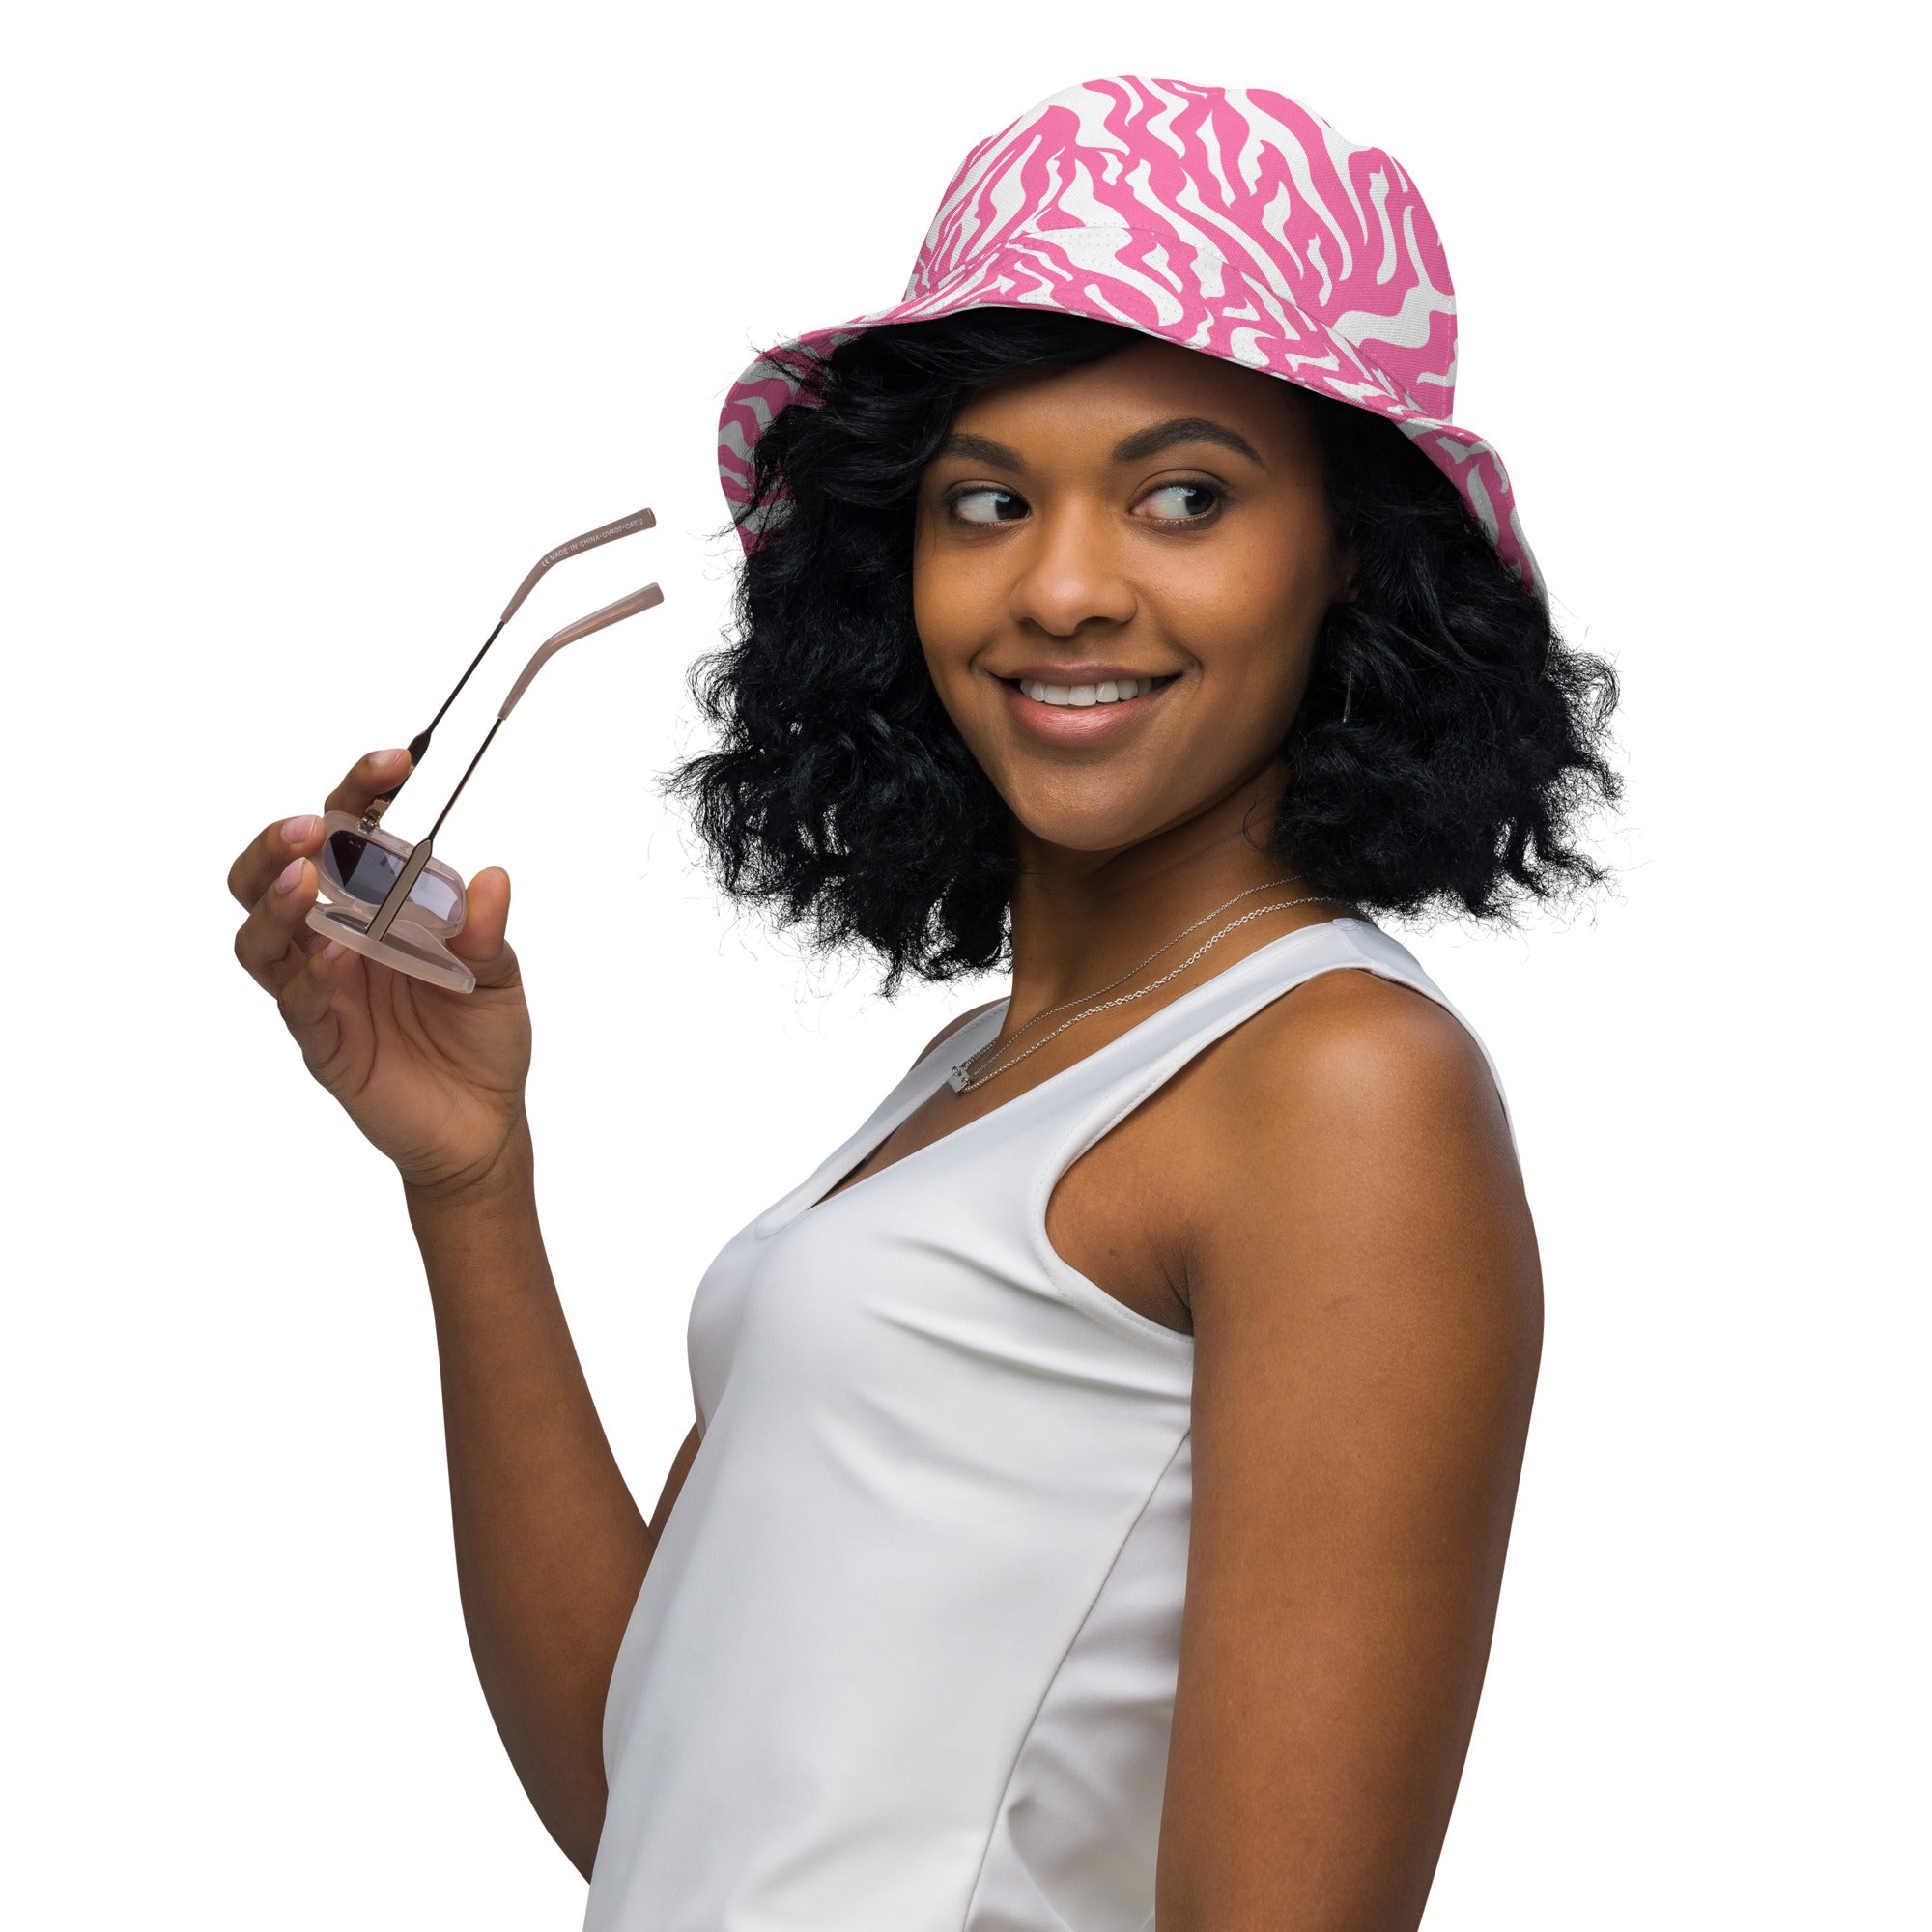 "Chic Stripes: Elevate your Look with our Pink Zebra Bucket Hat", lioness-love